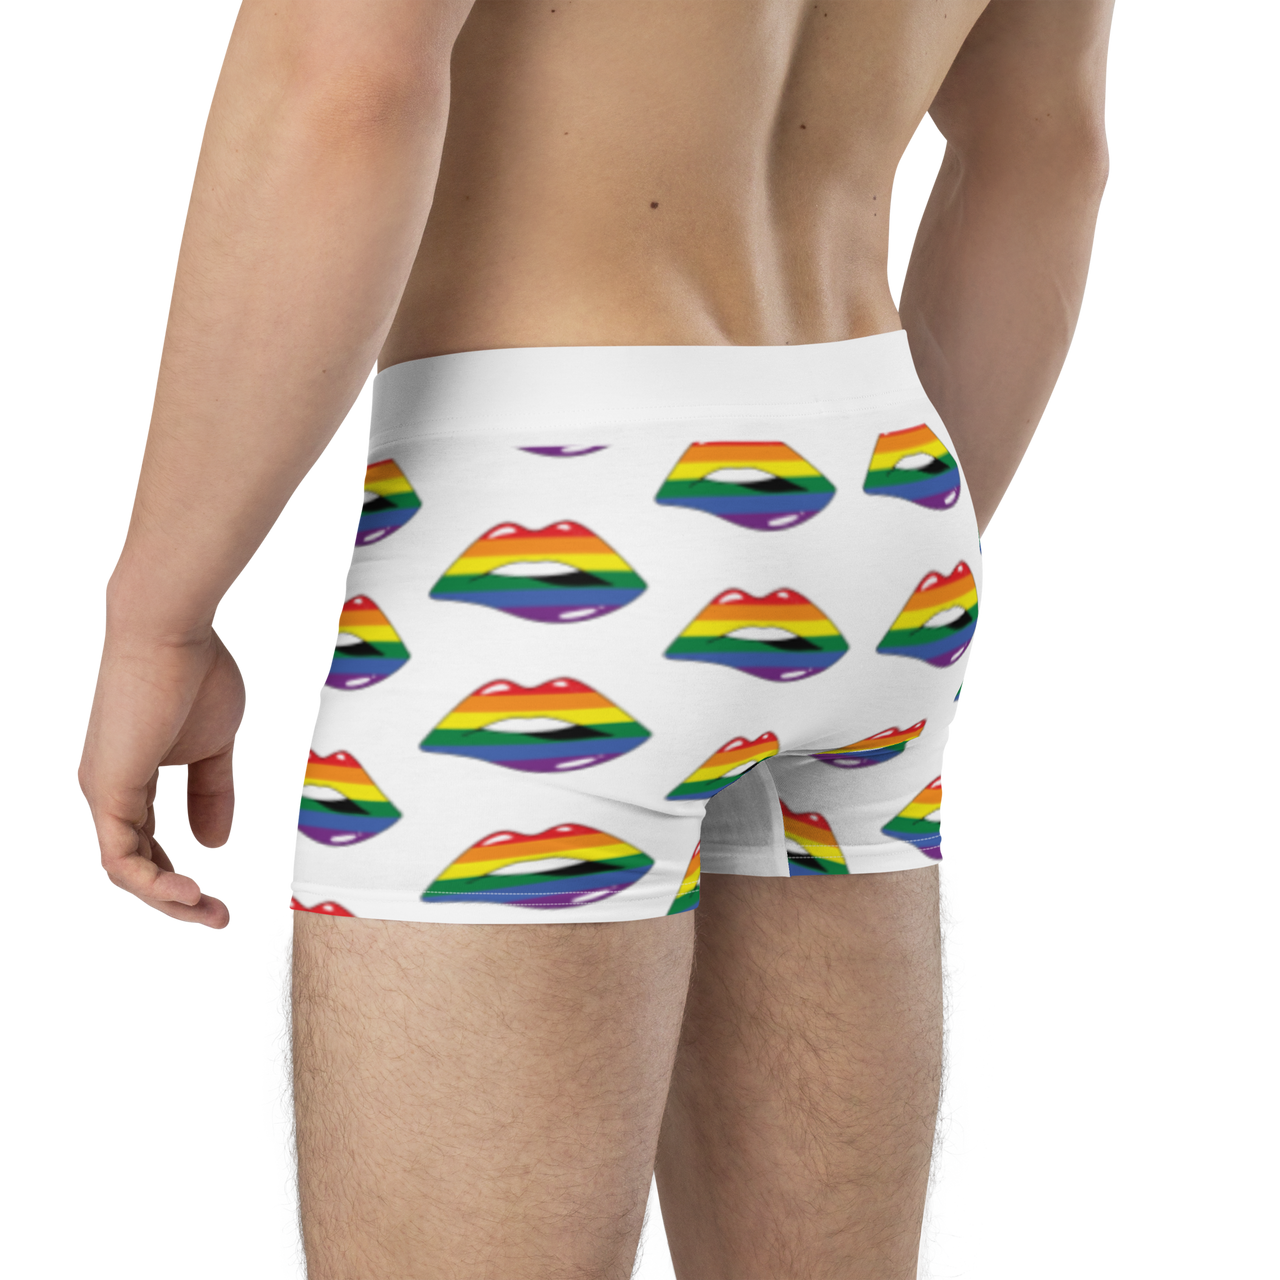 LGBTQ Flag Kisses Underwear for Her/Him or They/Them - White SHAVA